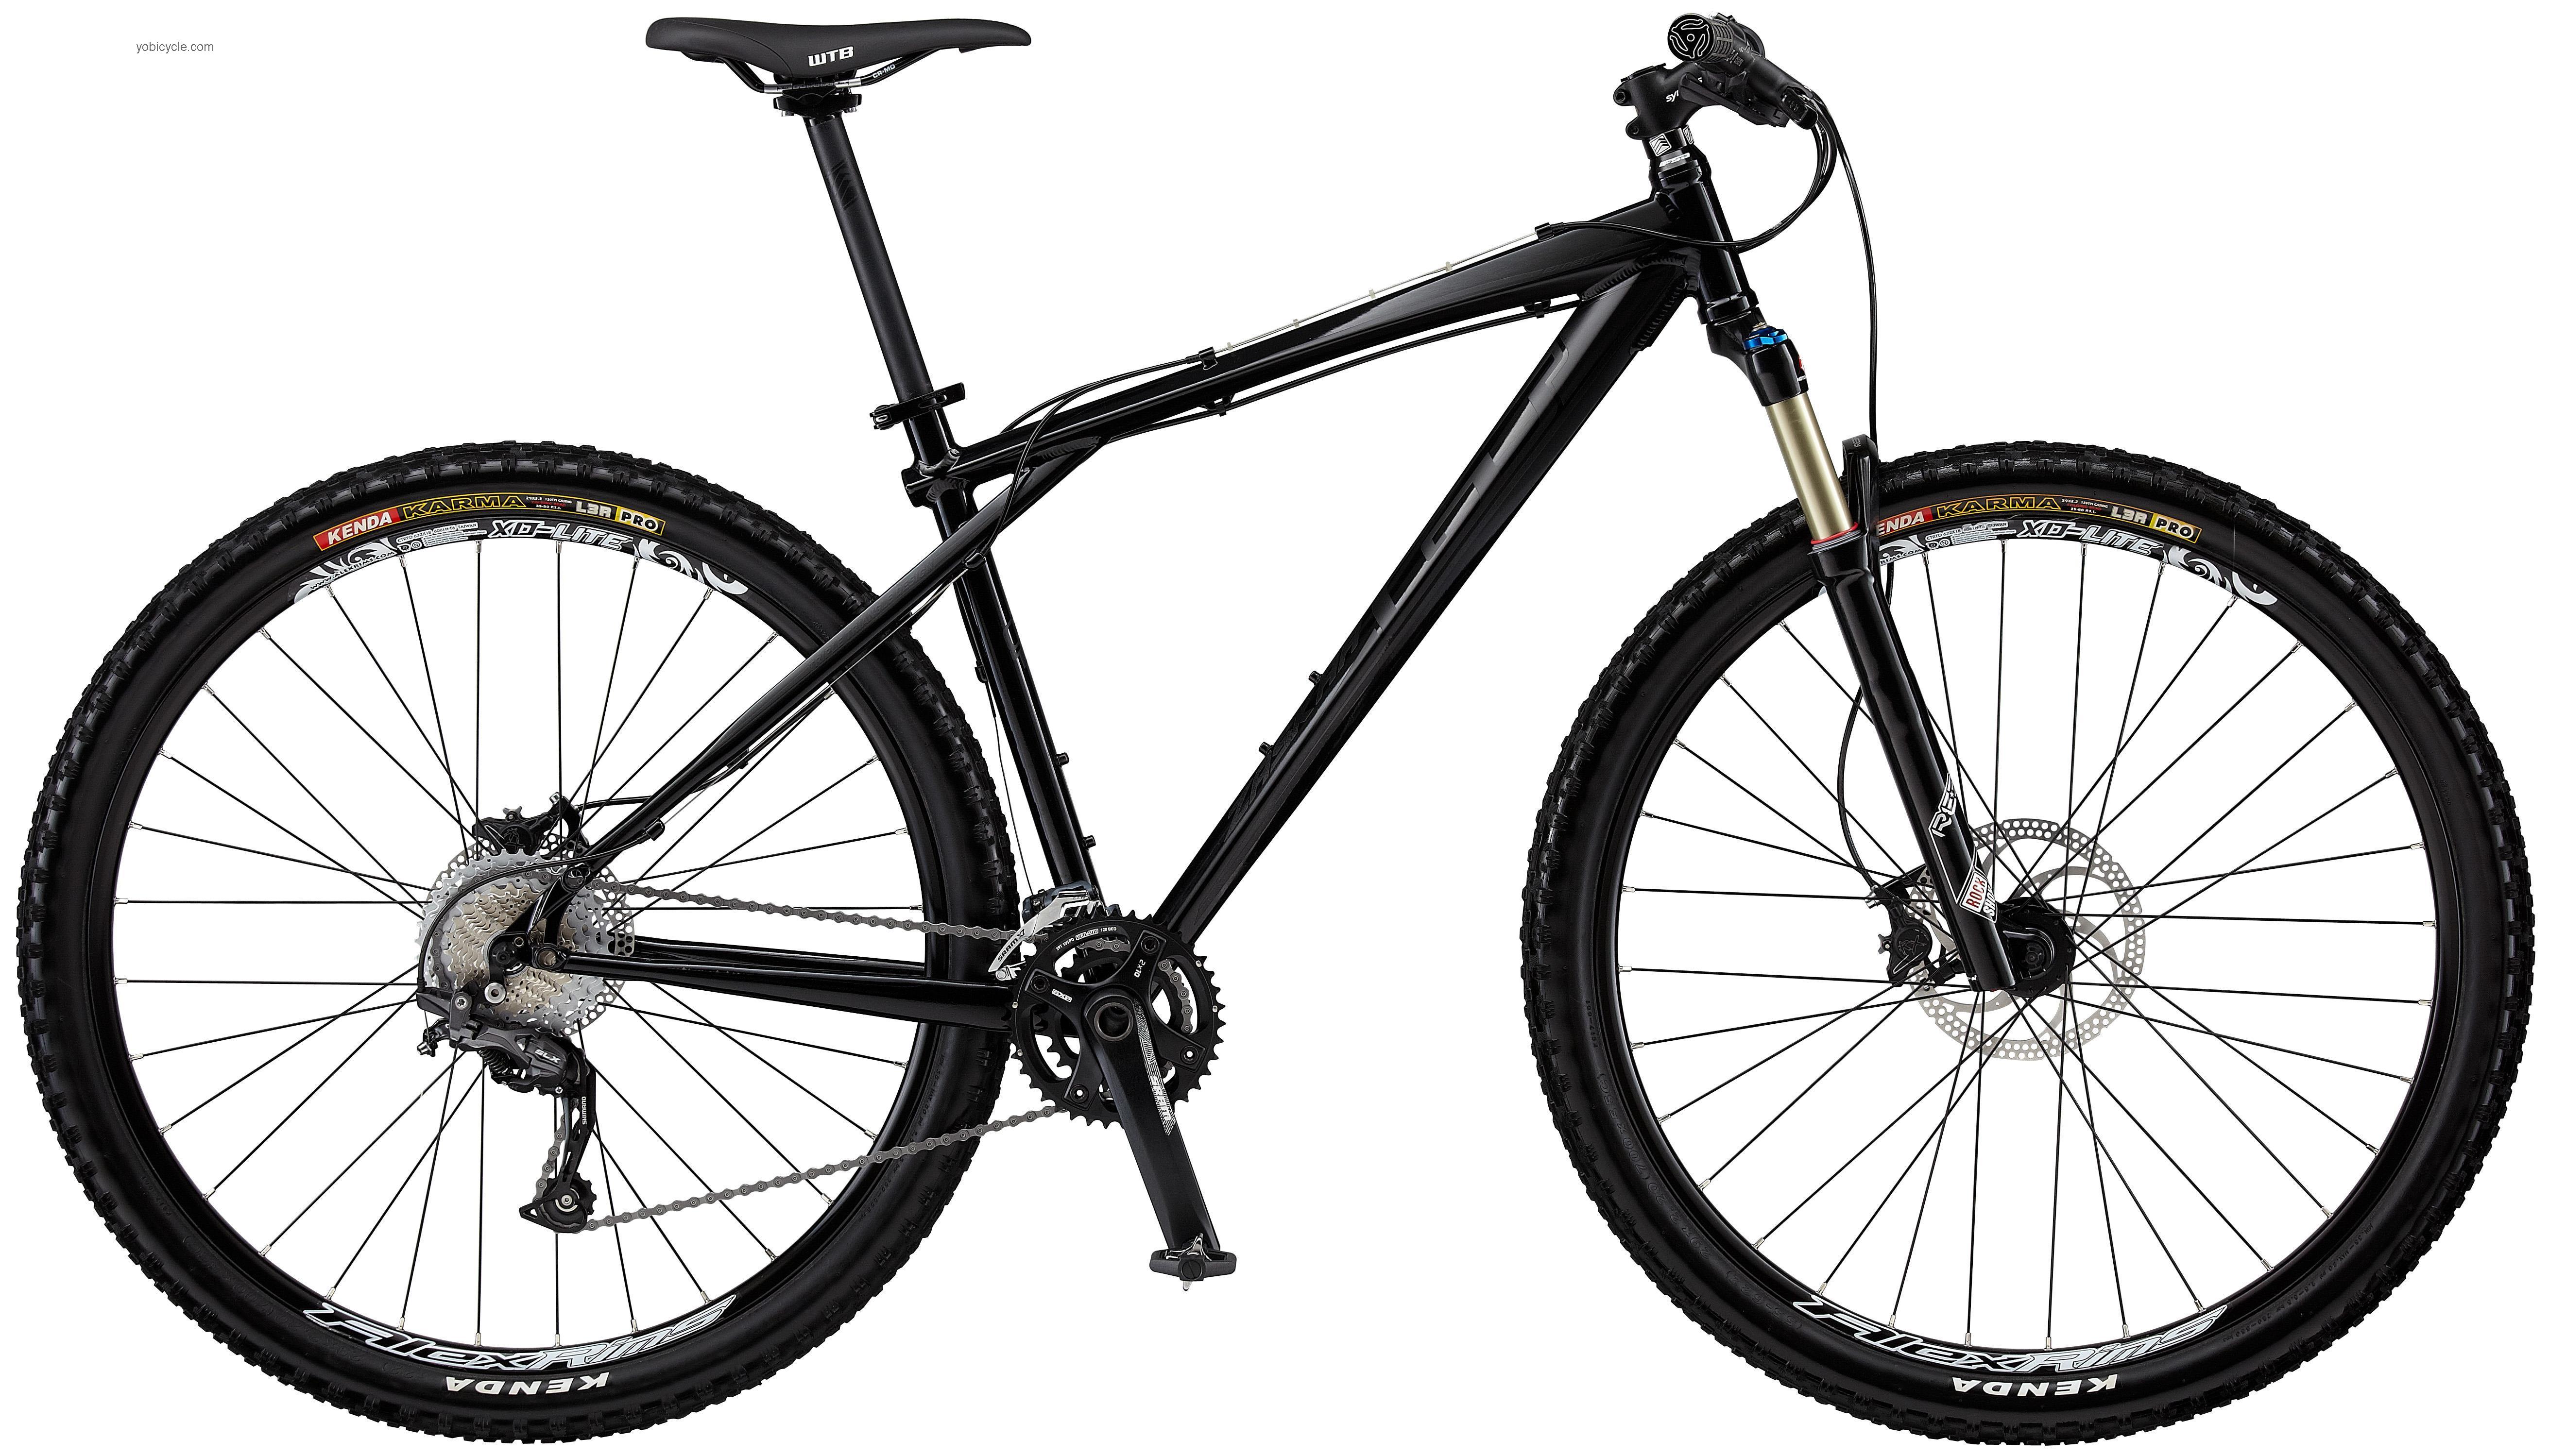 GT Zaskar 29er Expert competitors and comparison tool online specs and performance